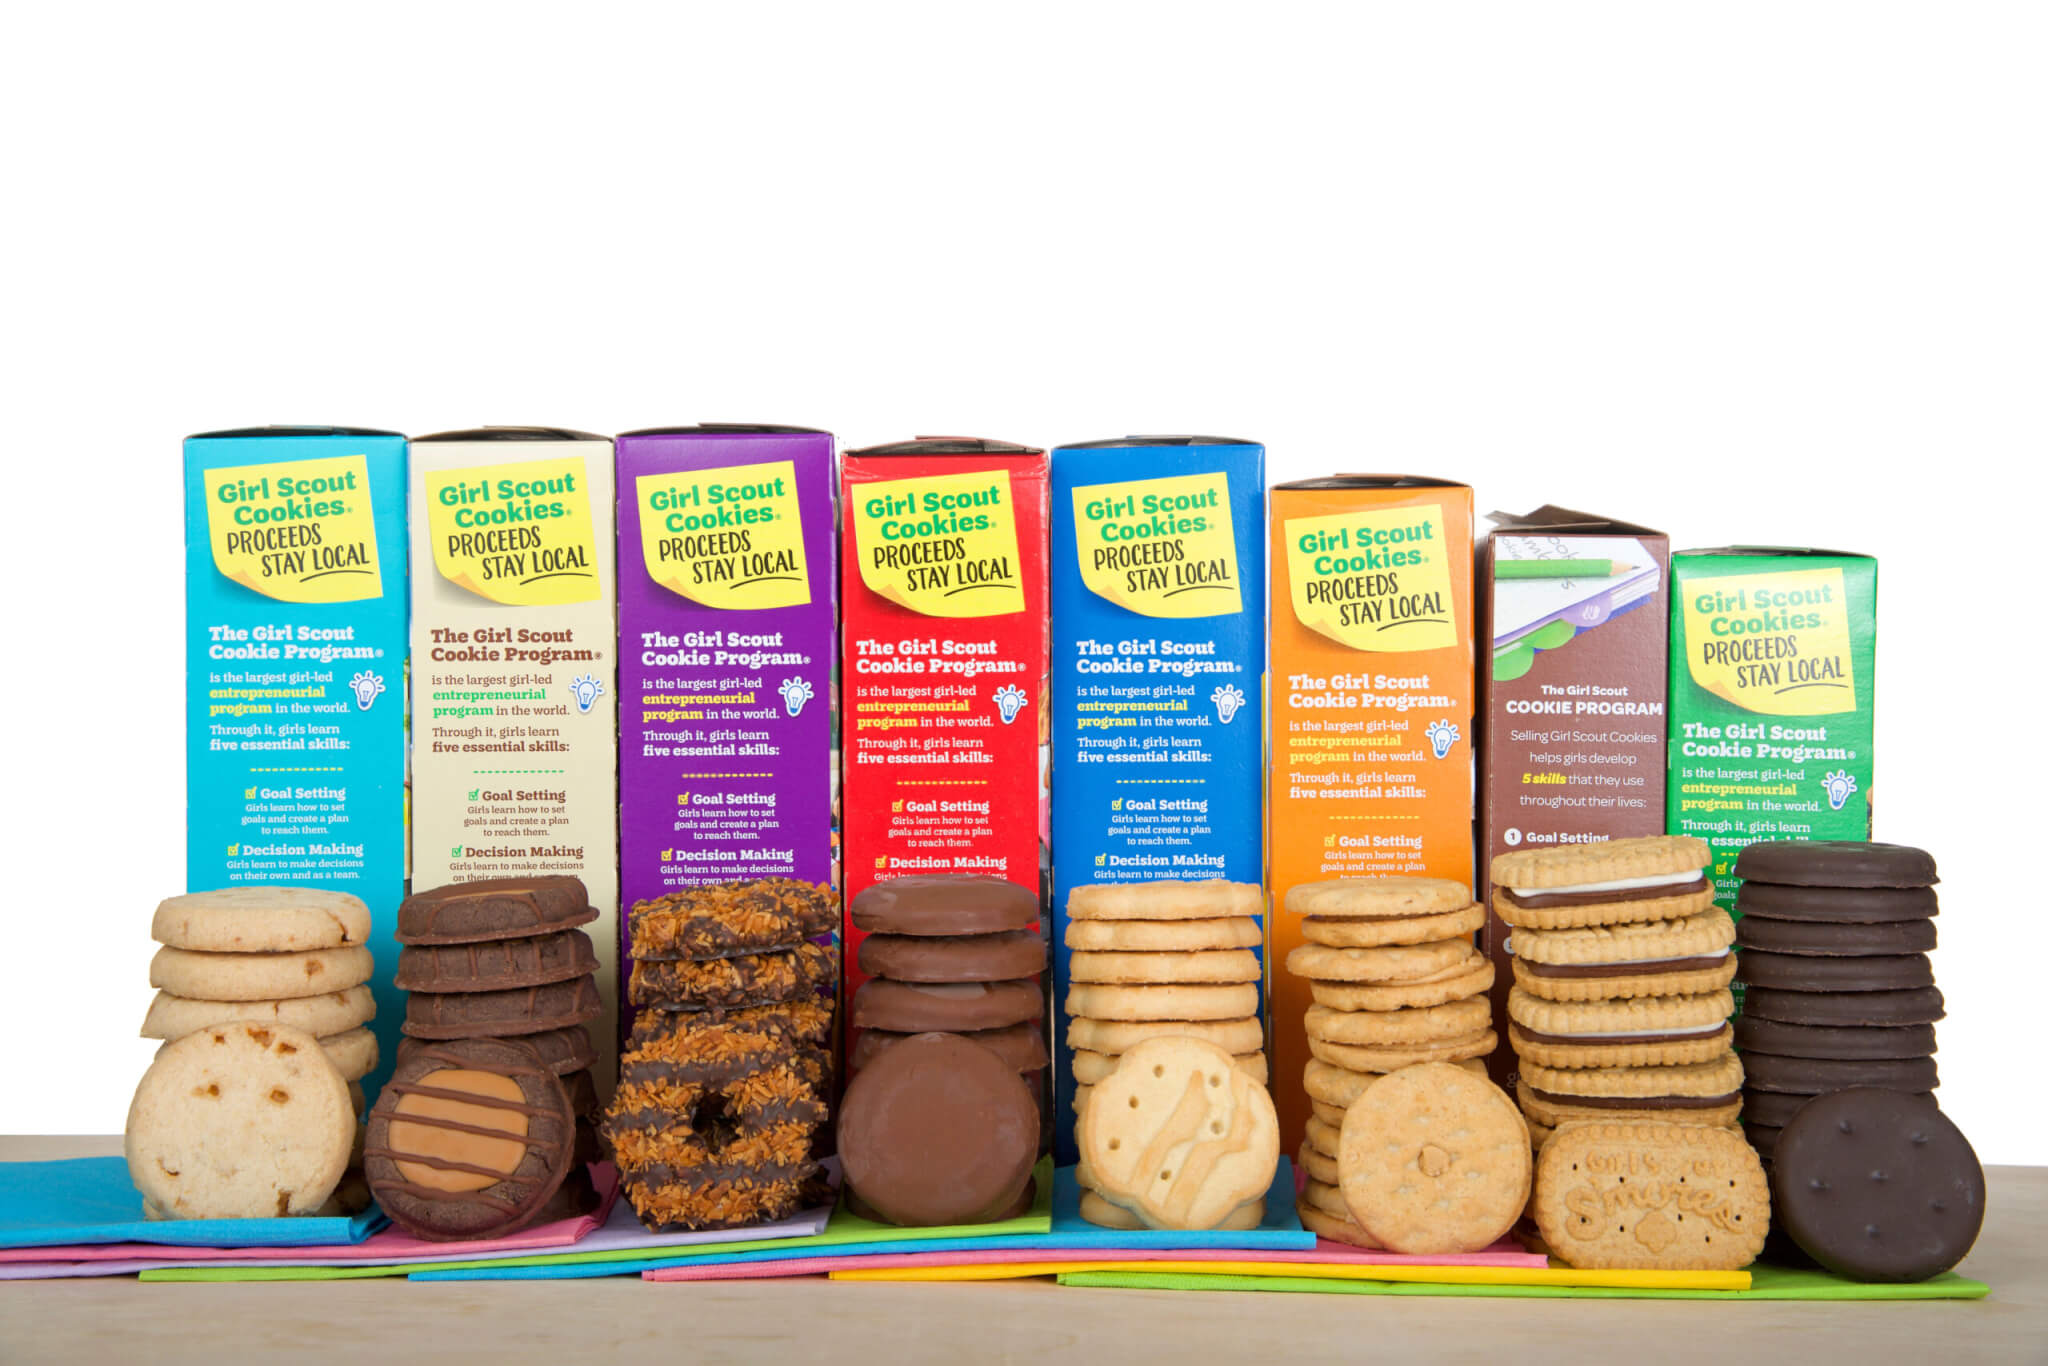 Best Girl Scouts Cookies: Top 5 Iconic Flavors, According To Expert Reviews  - Study Finds